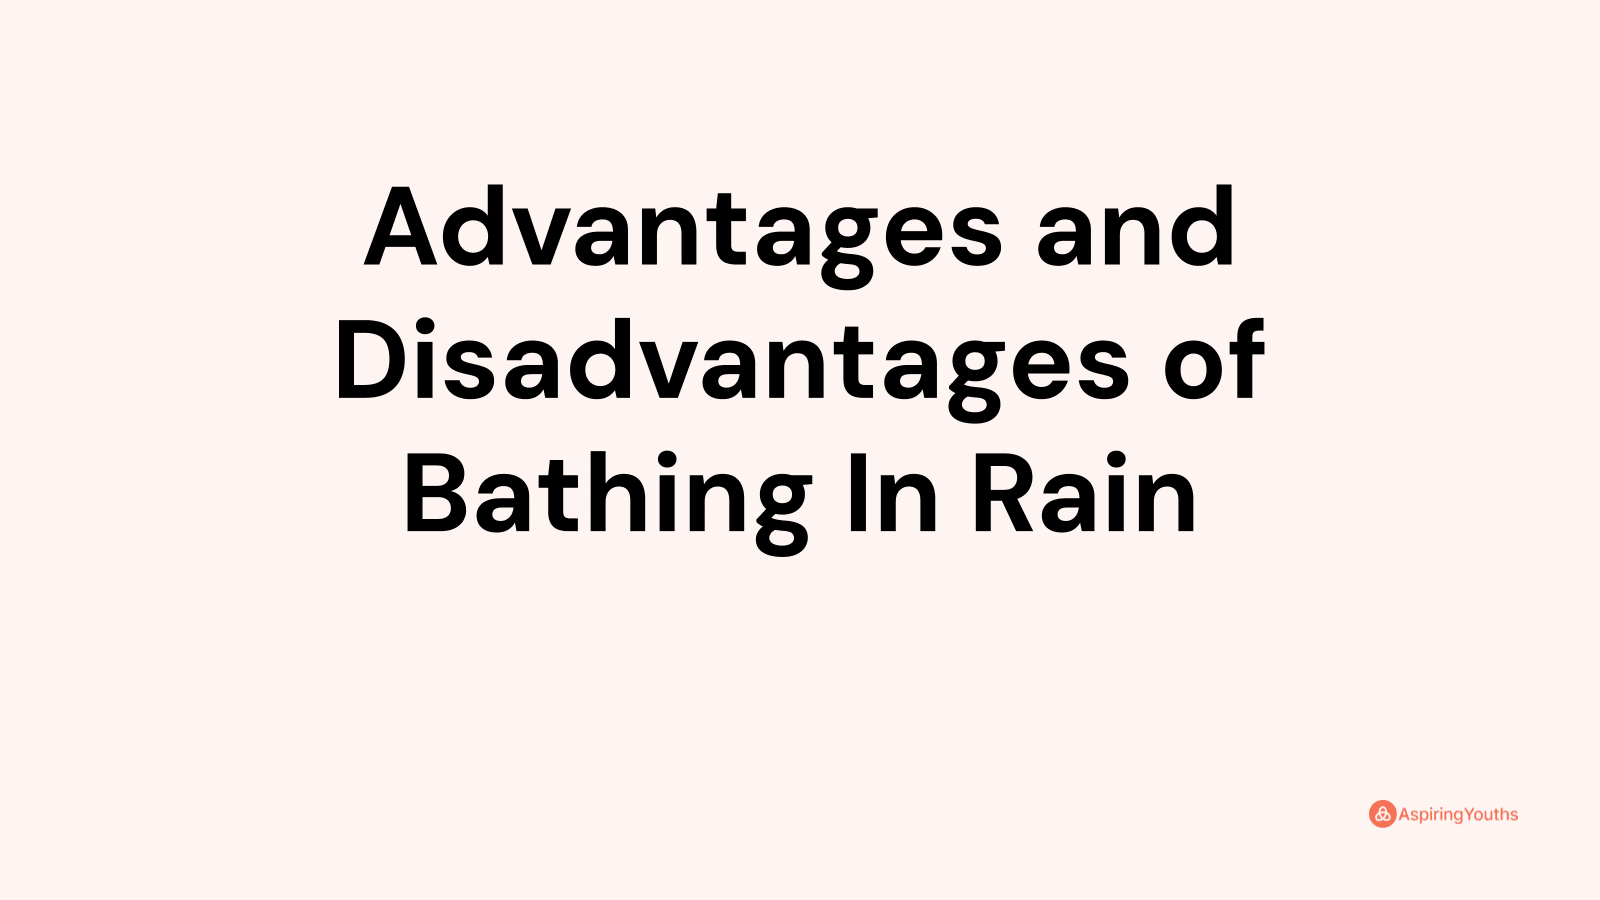 Advantages and disadvantages of Bathing In Rain